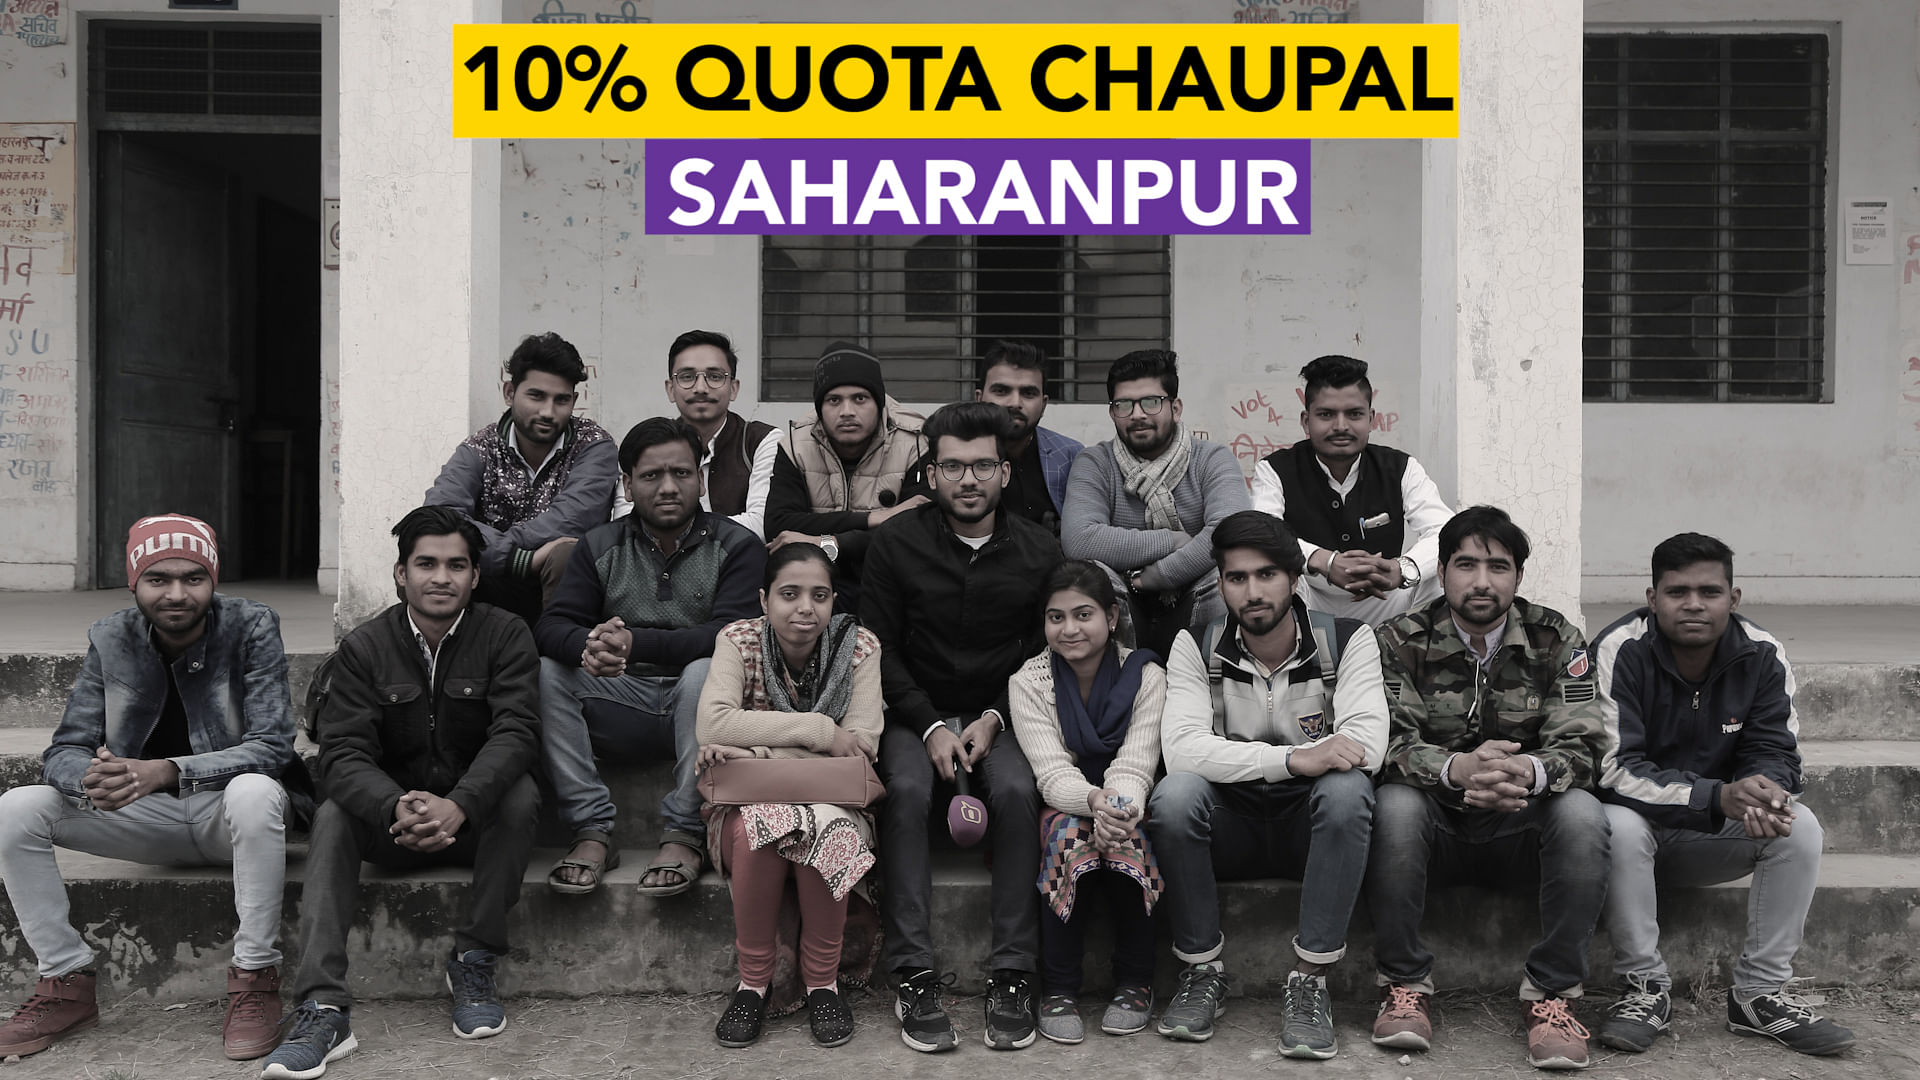 What Young Saharanpur Thinks About 10% Quota For Upper Castes.